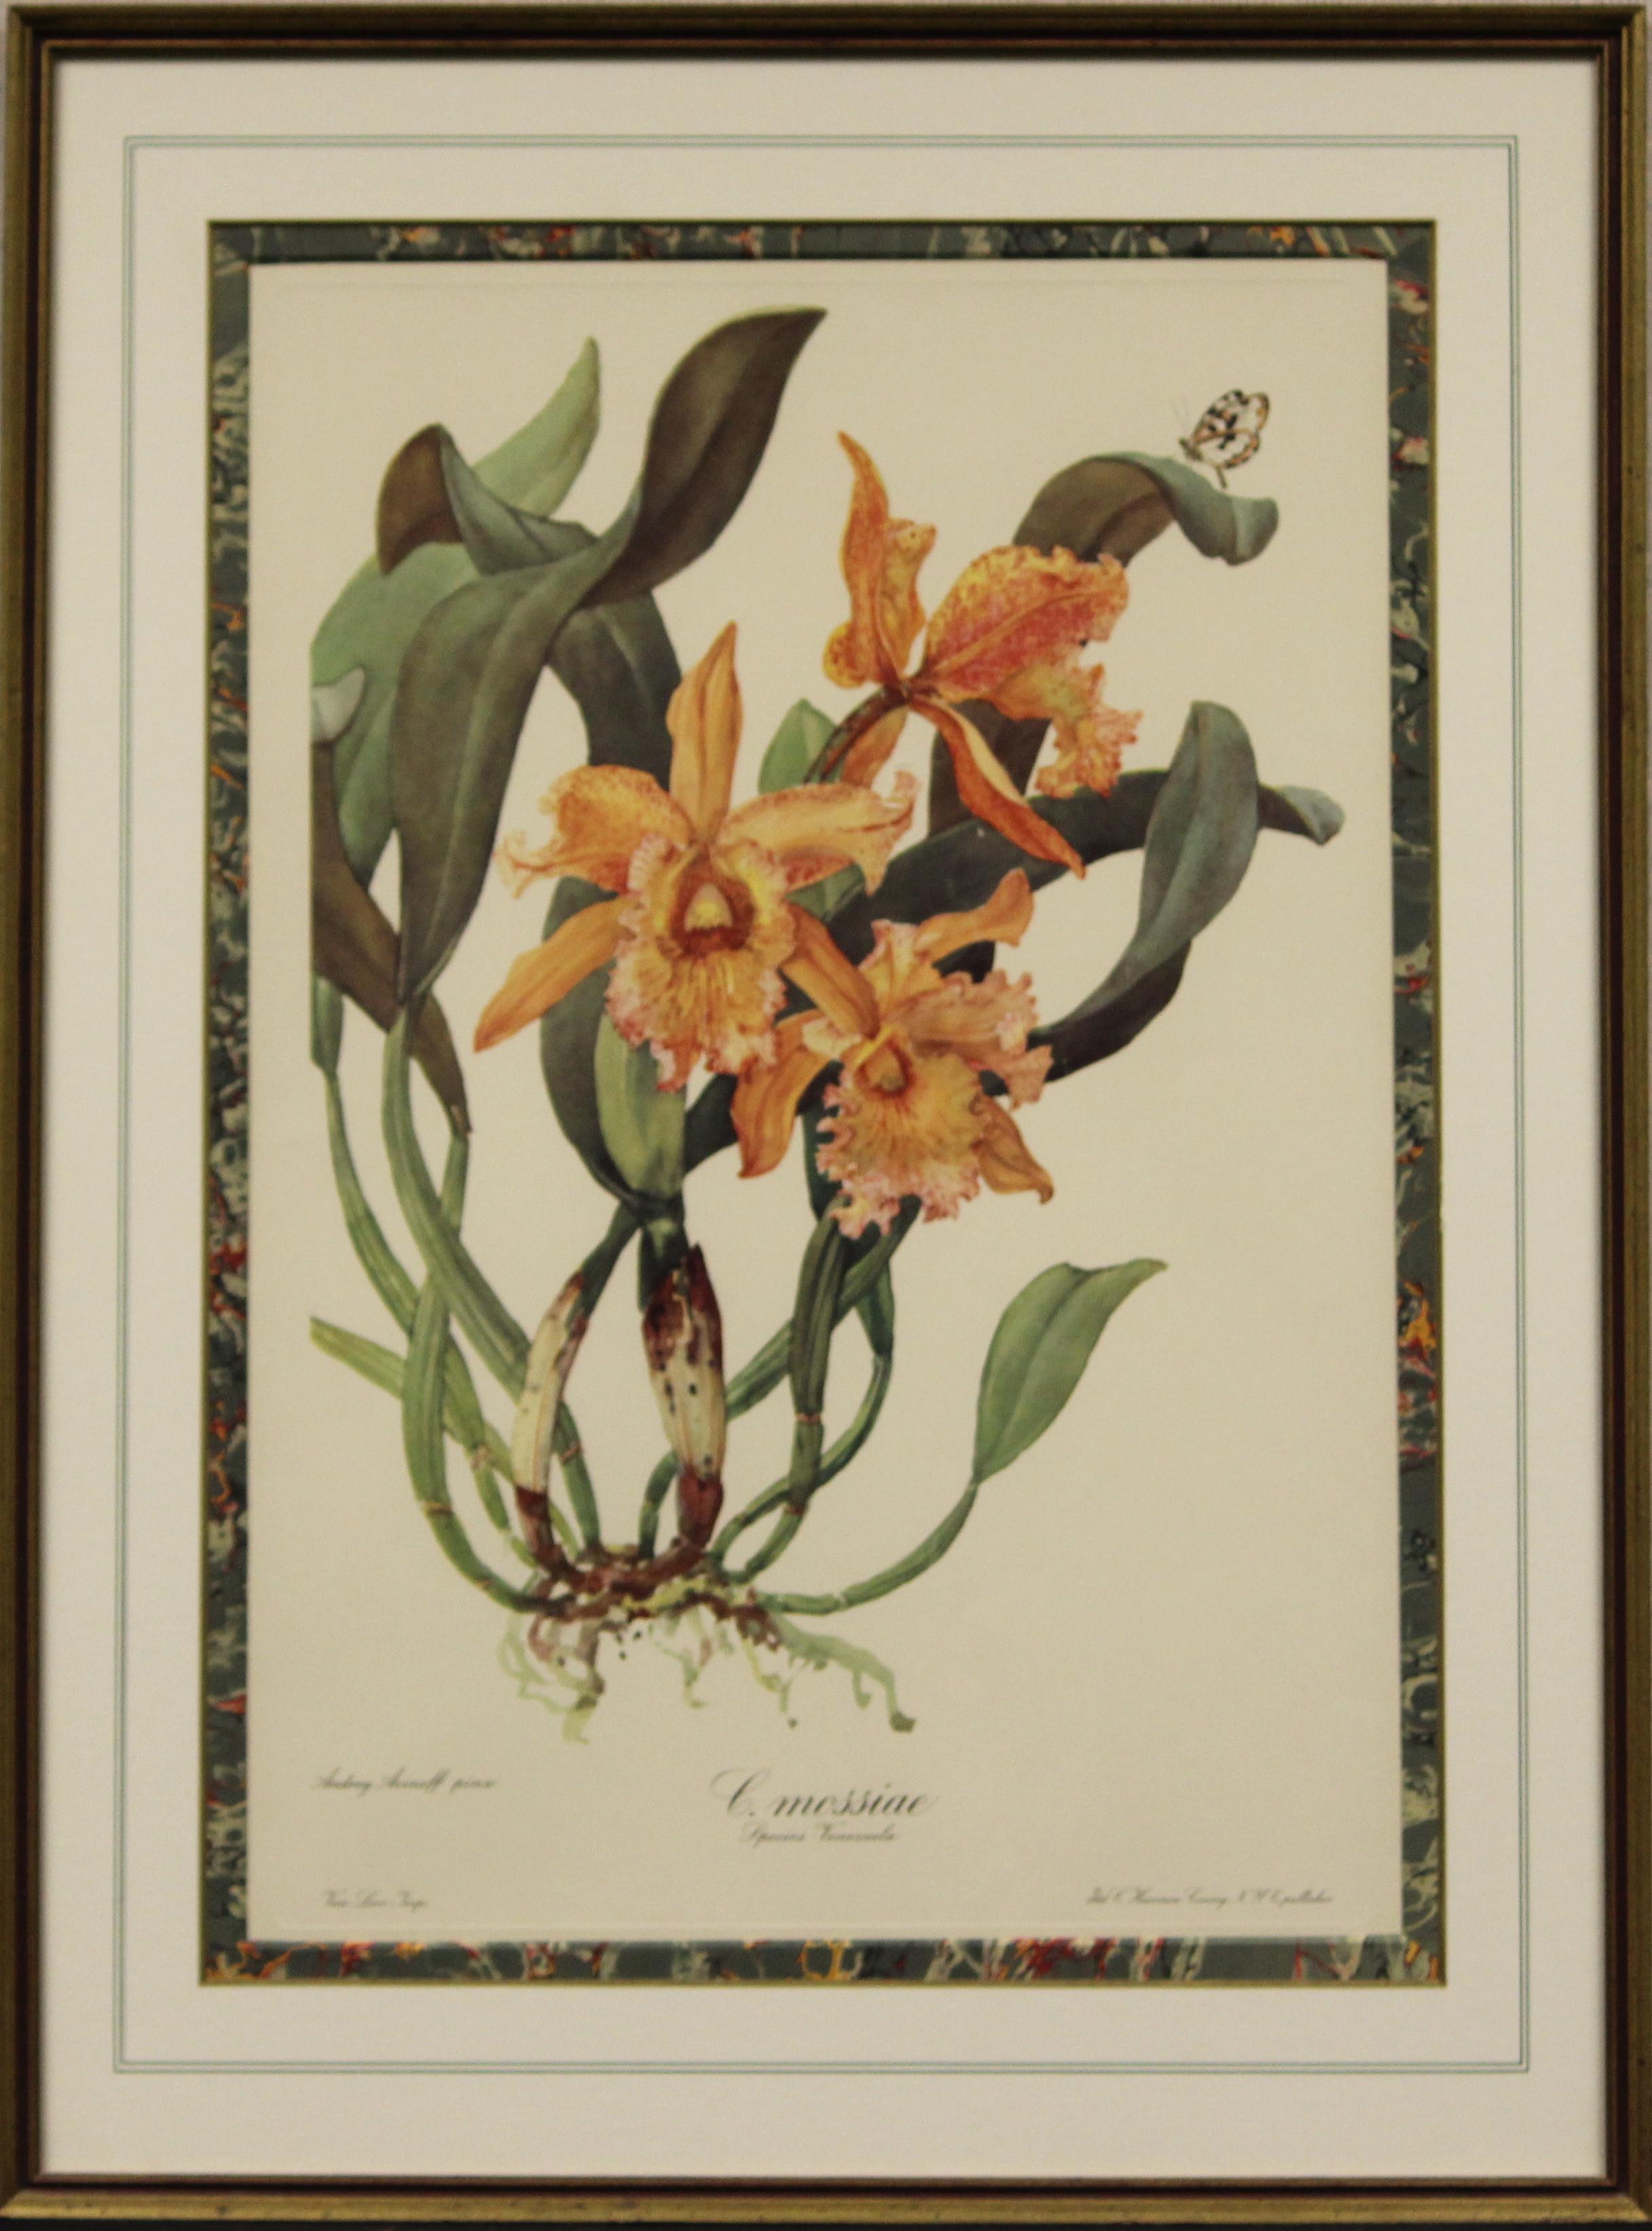 "C.mossiae" - Print by Unknown